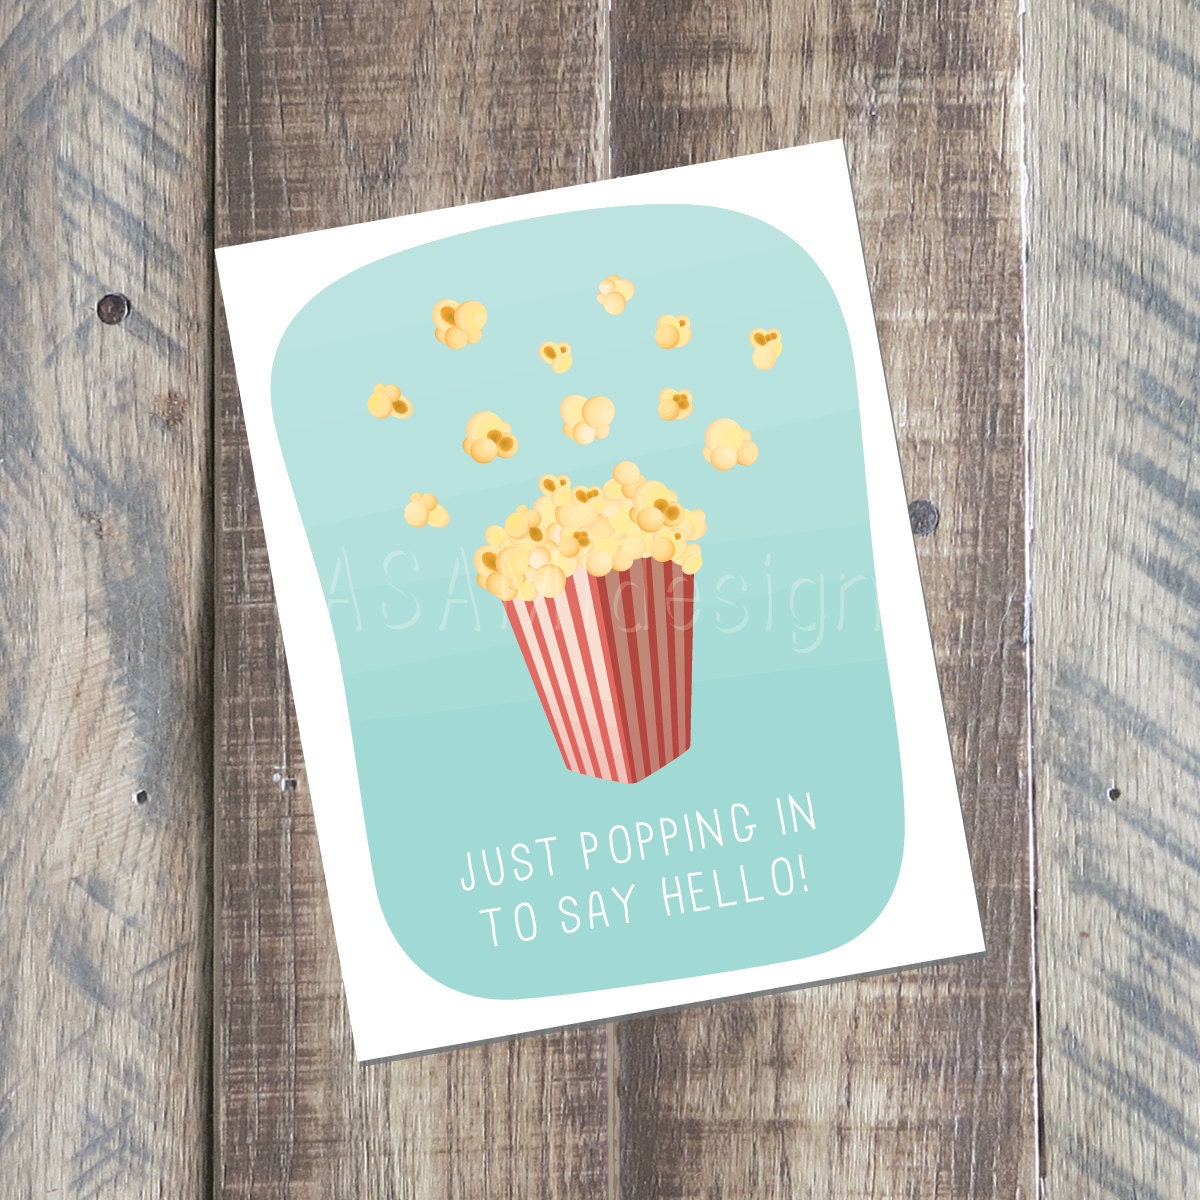 Hello Card Printable Just Popping In Card Popcorn Card